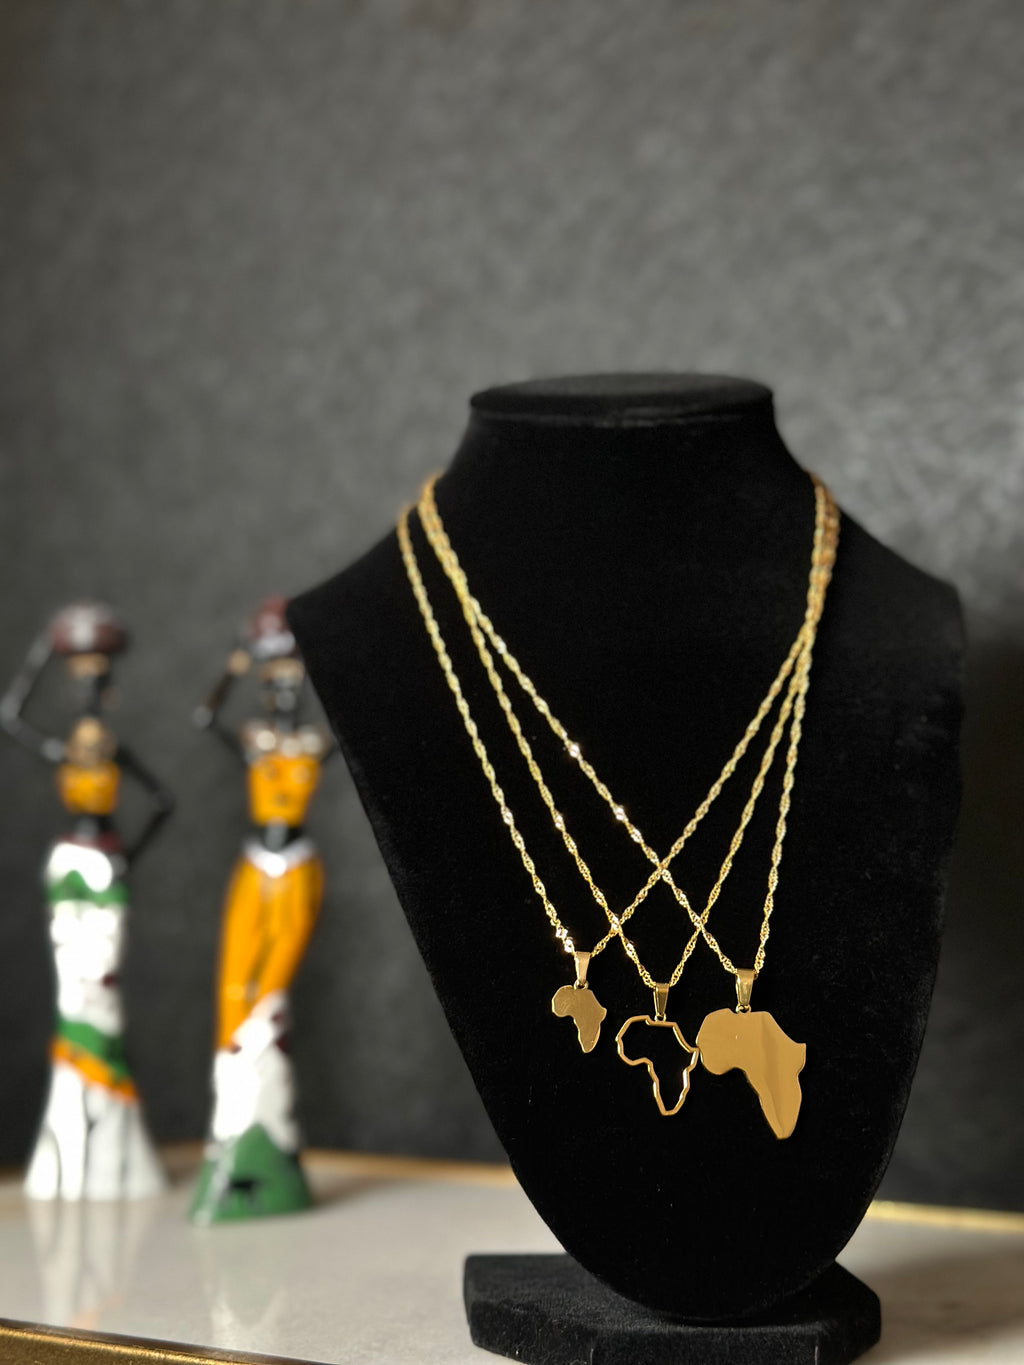 Motherland Necklace Collection